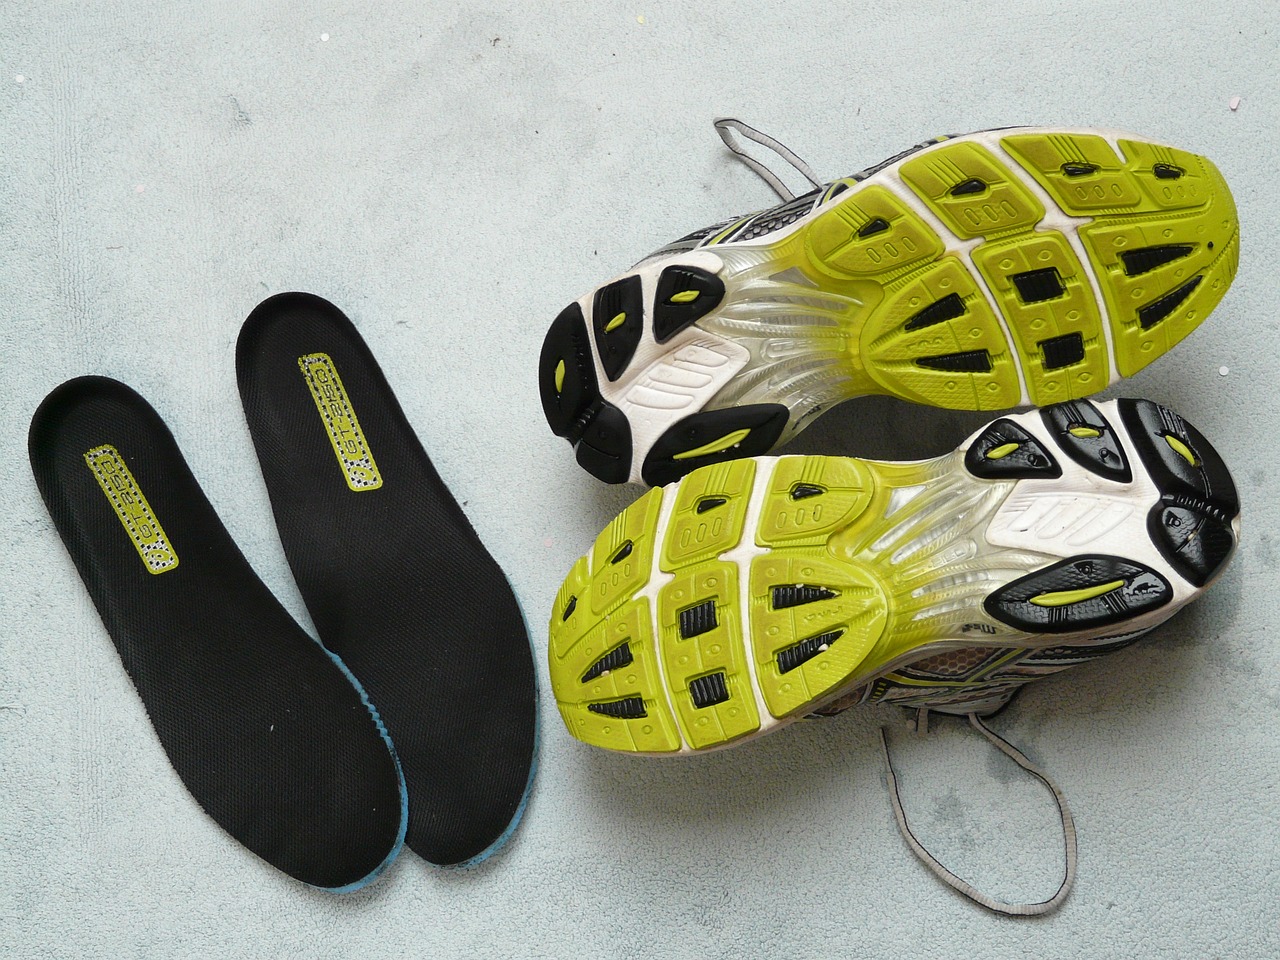 Choosing the right insole